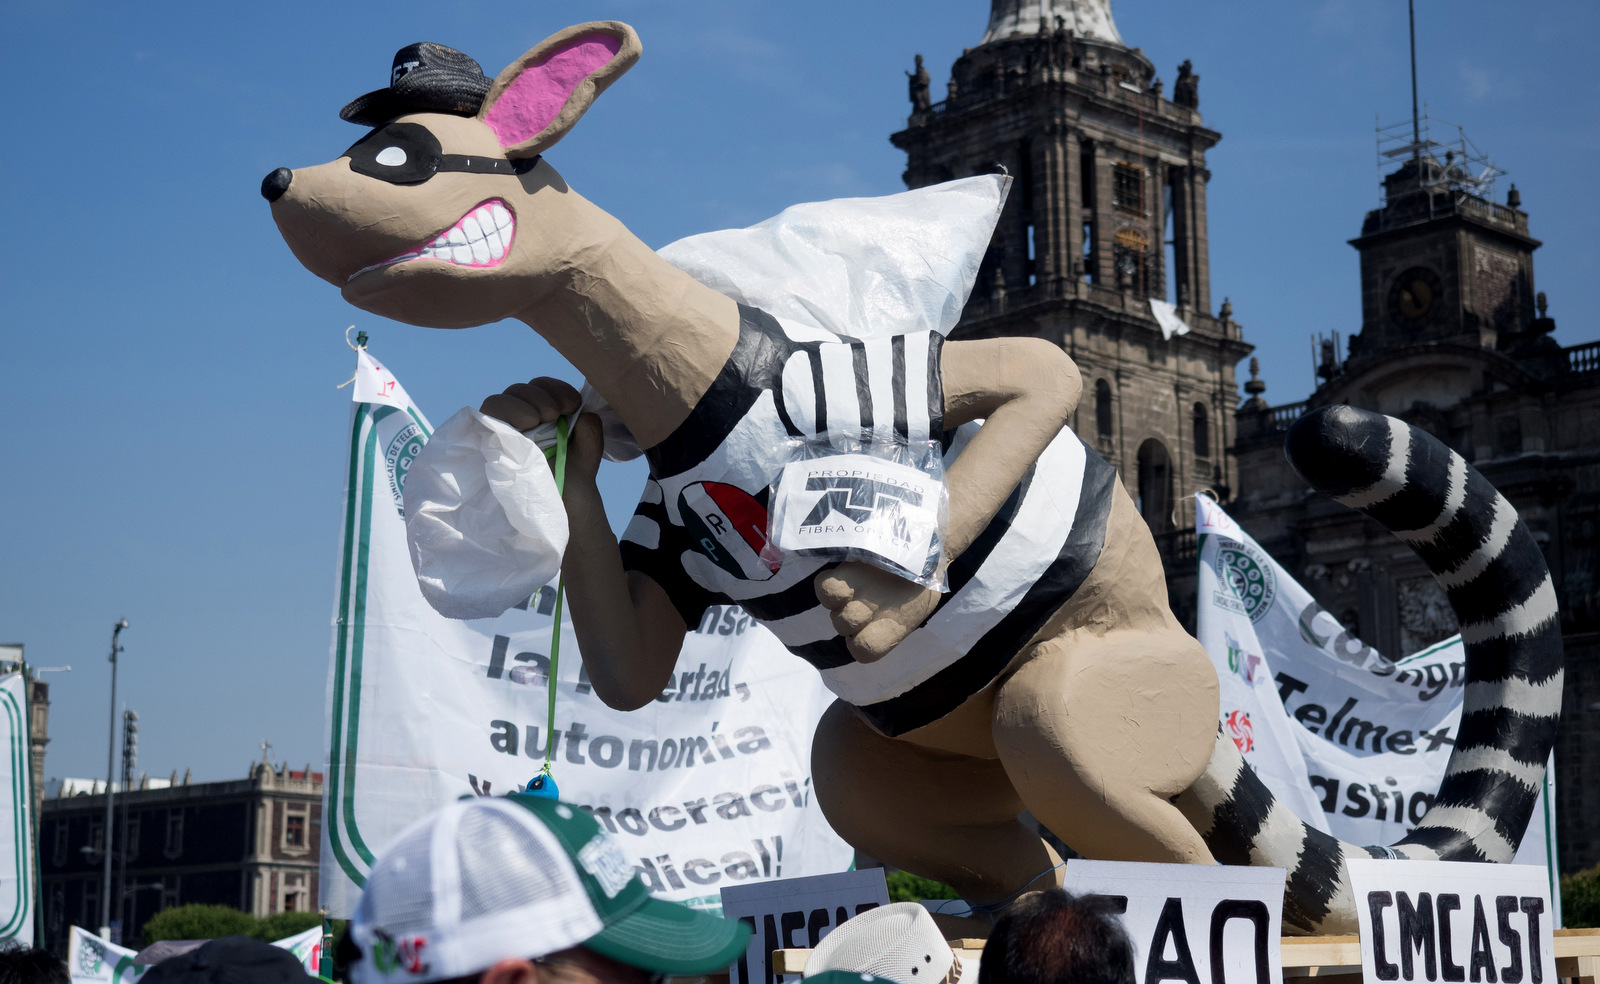 Trade unionists carry a thieving lemur to represent the exit of capital from Mexico after the country’s telecommunications services were privatized, Mexico City, May 1, 2018. (Photo: José Luis Granados Ceja)